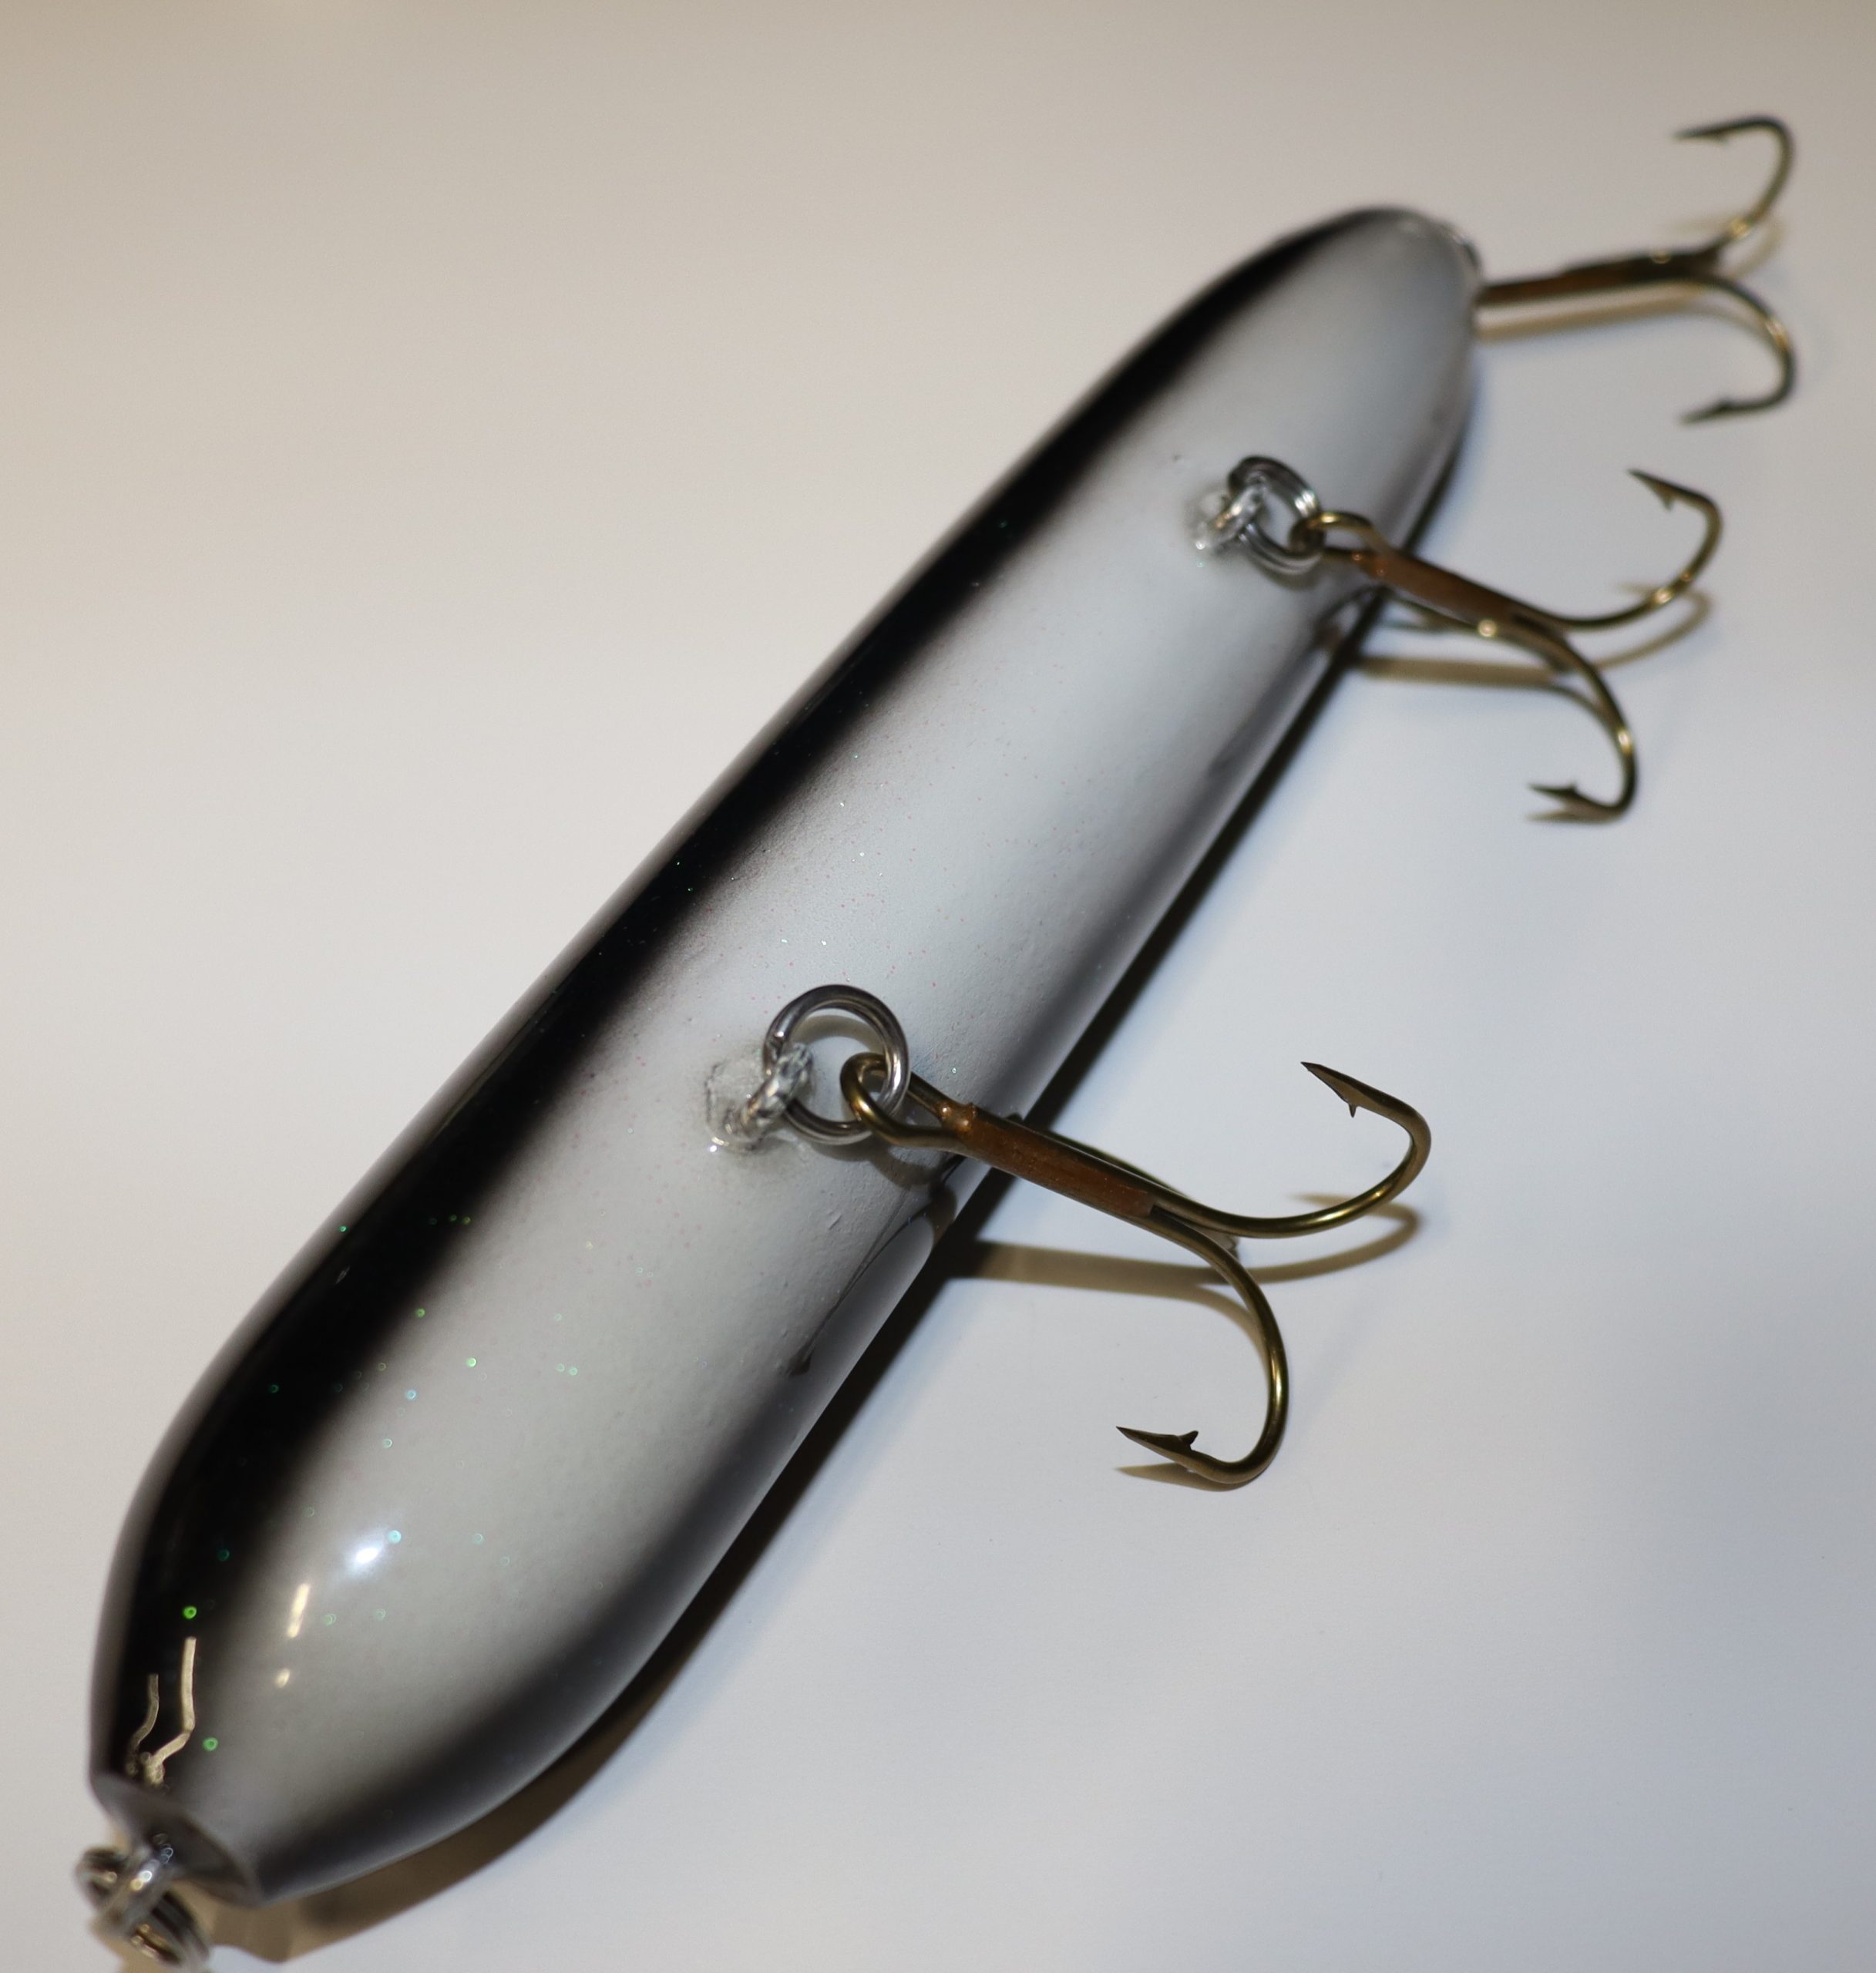 One Eyed Willy Regular Custom Color Topwater